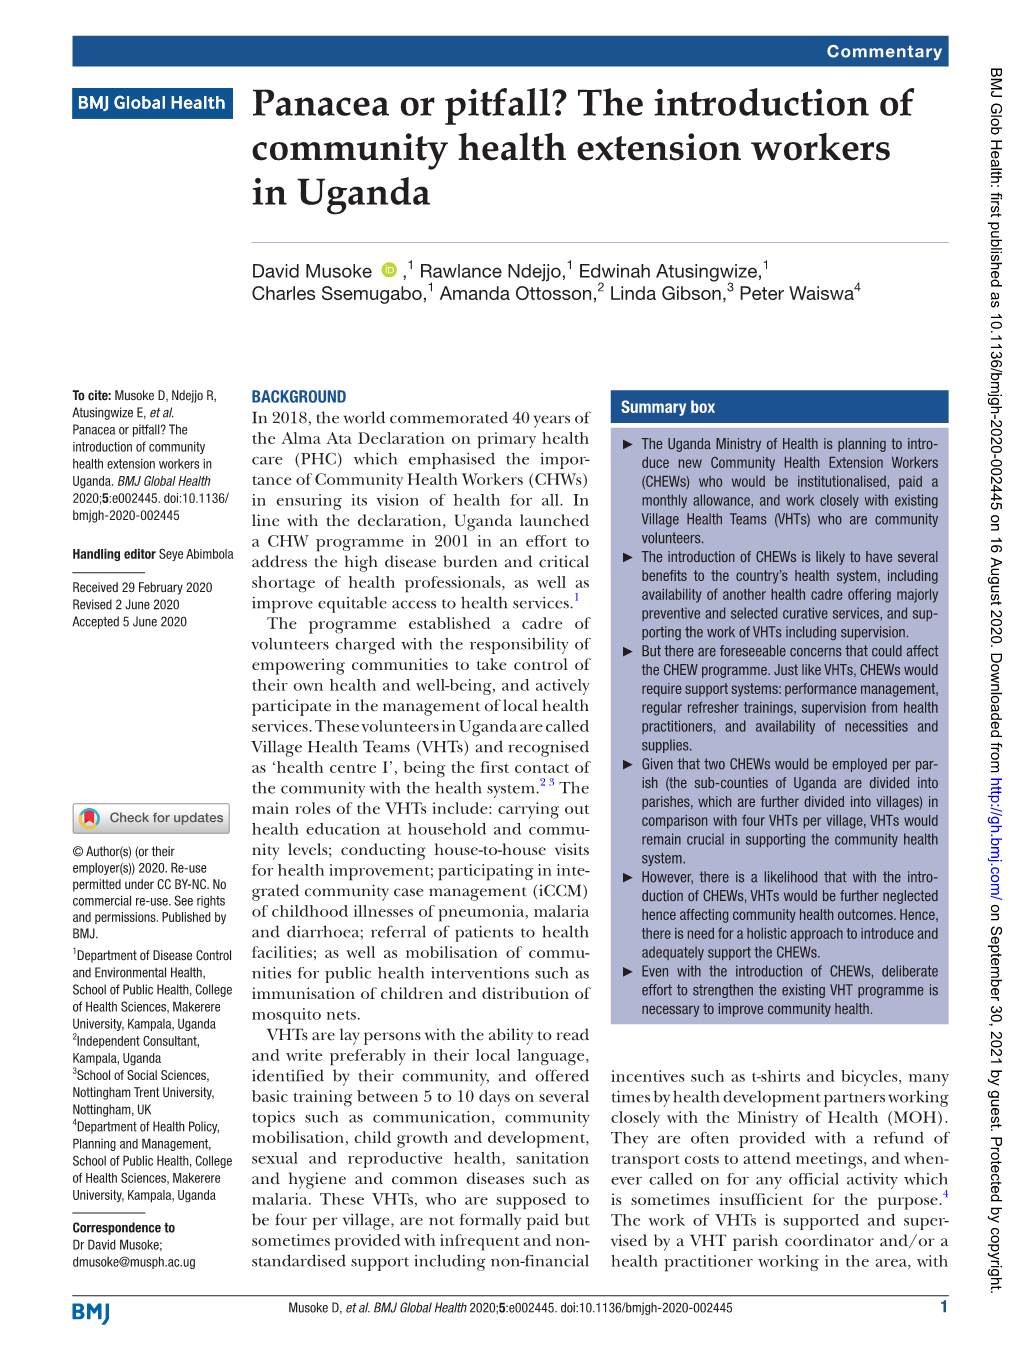 The Introduction of Community Health Extension Workers in Uganda